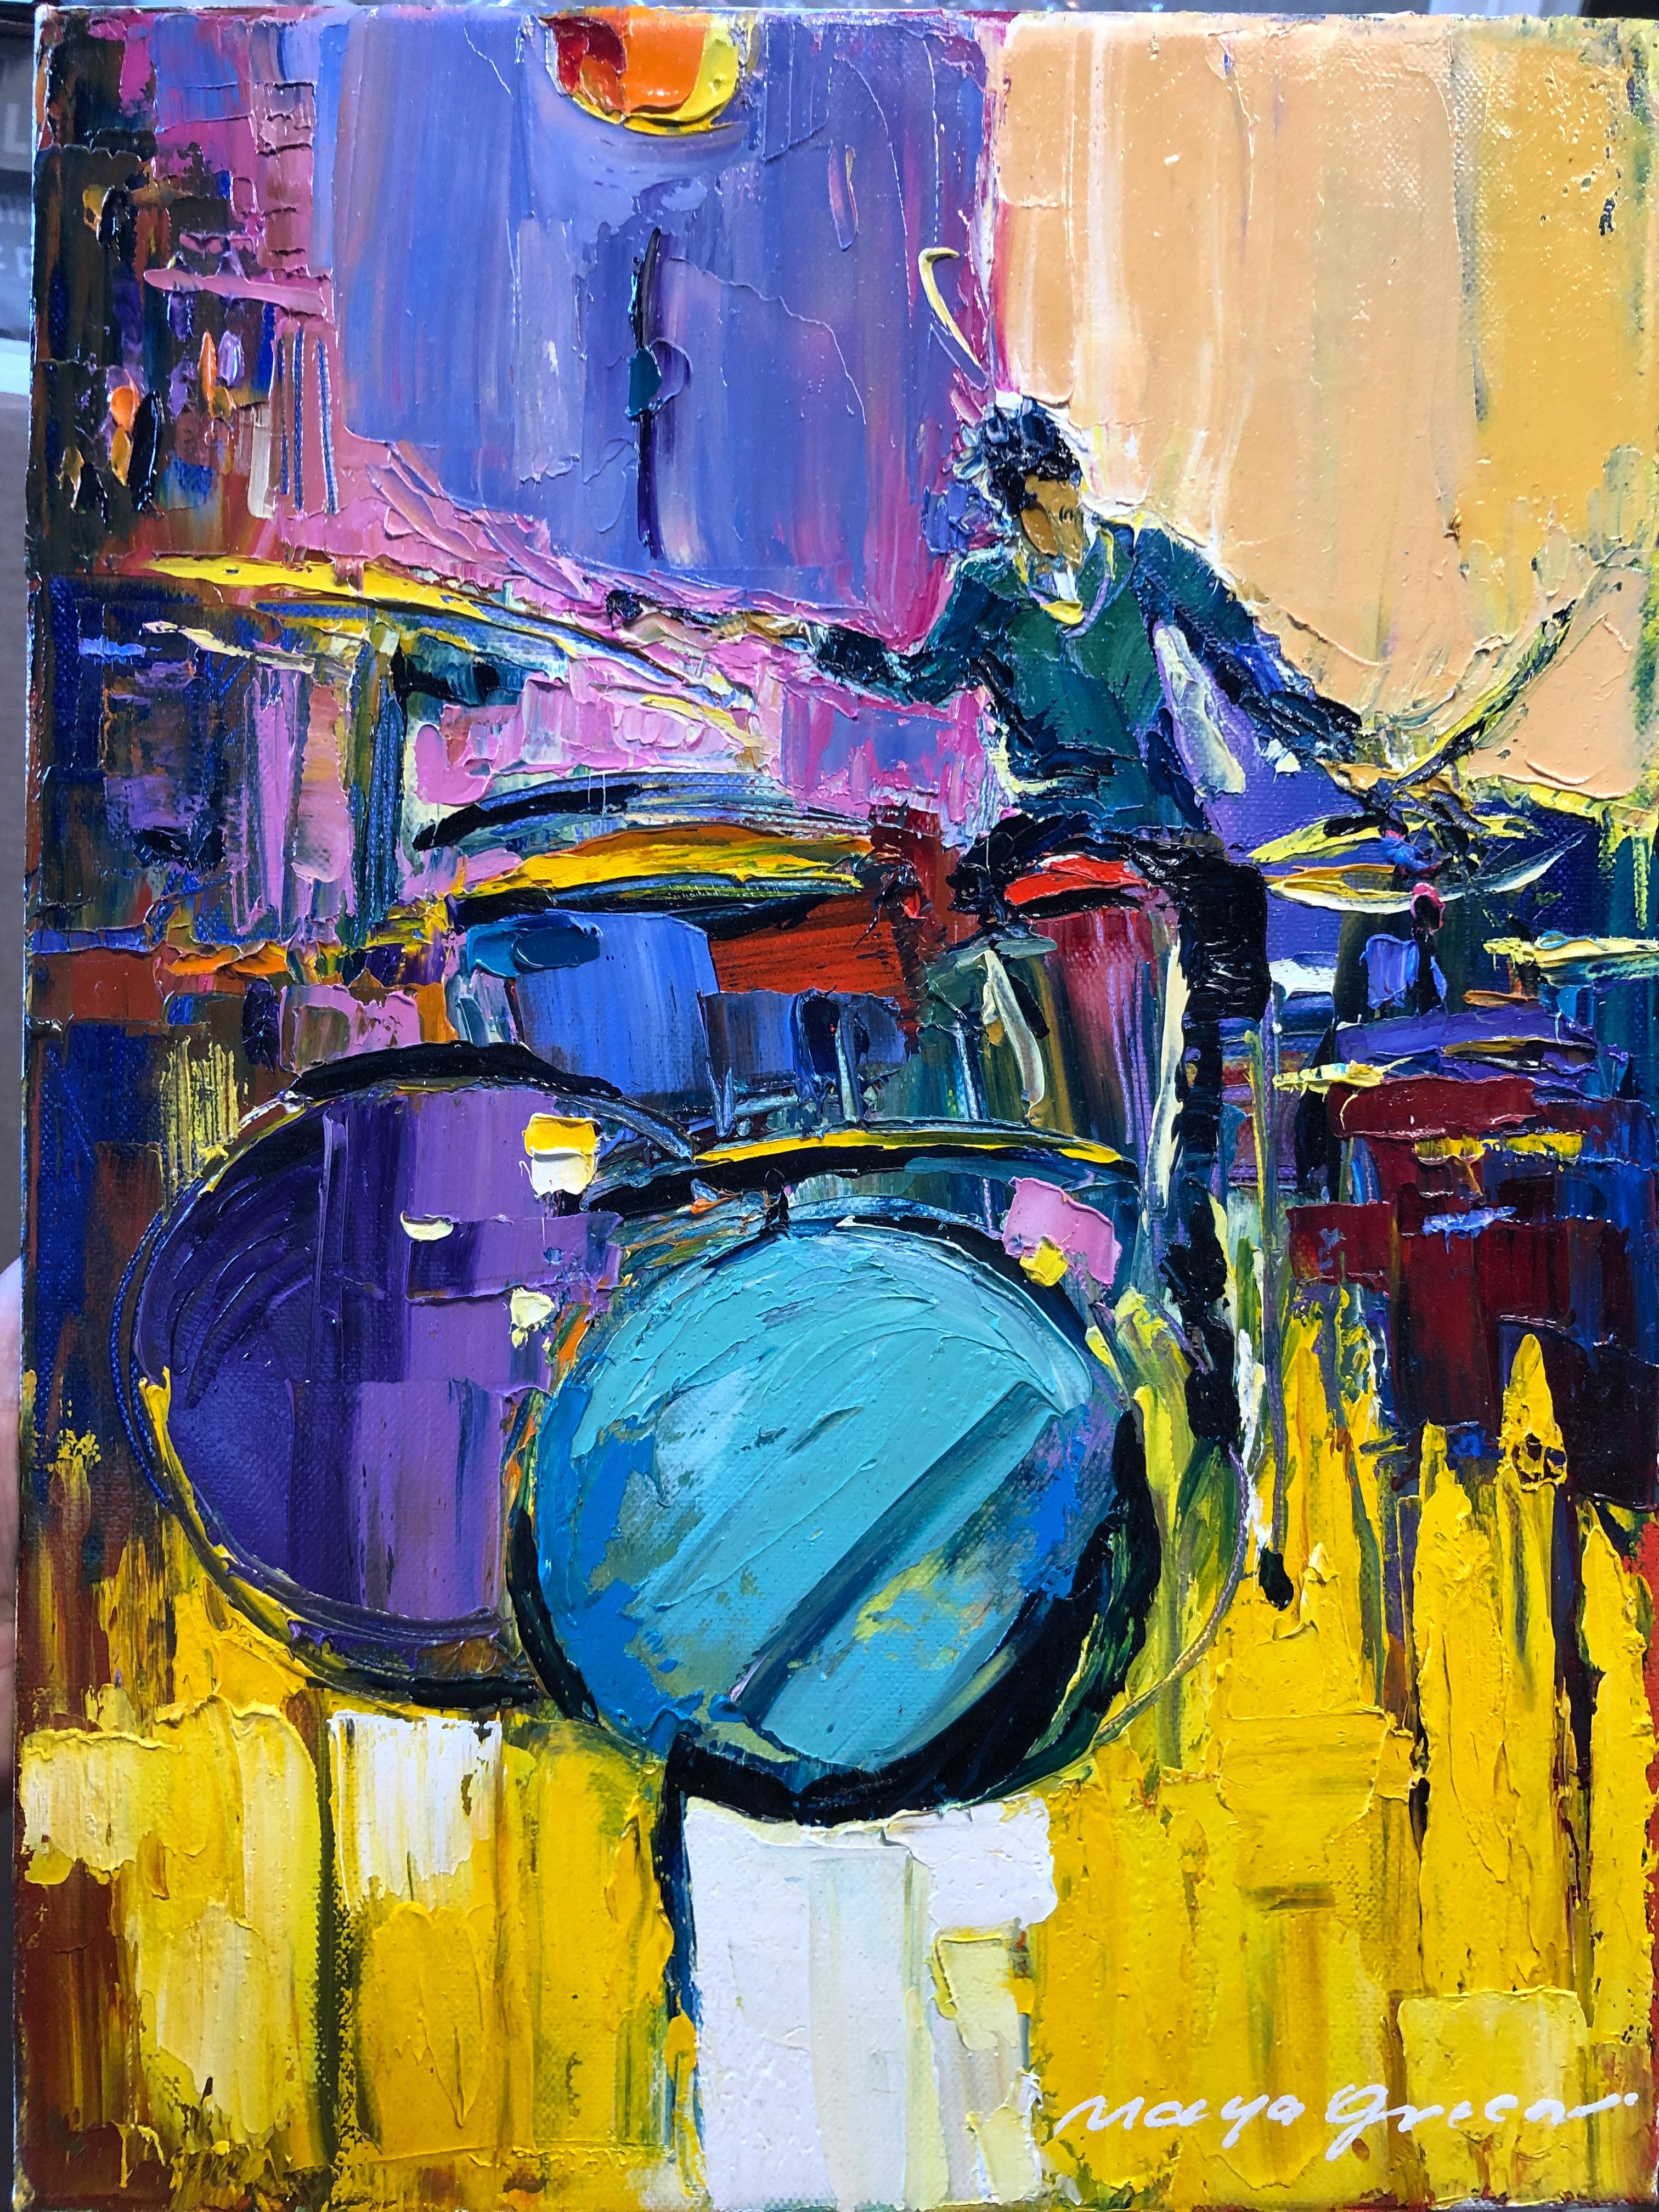 Jazz Painting Oil on Canvas Palette Knife 16x12